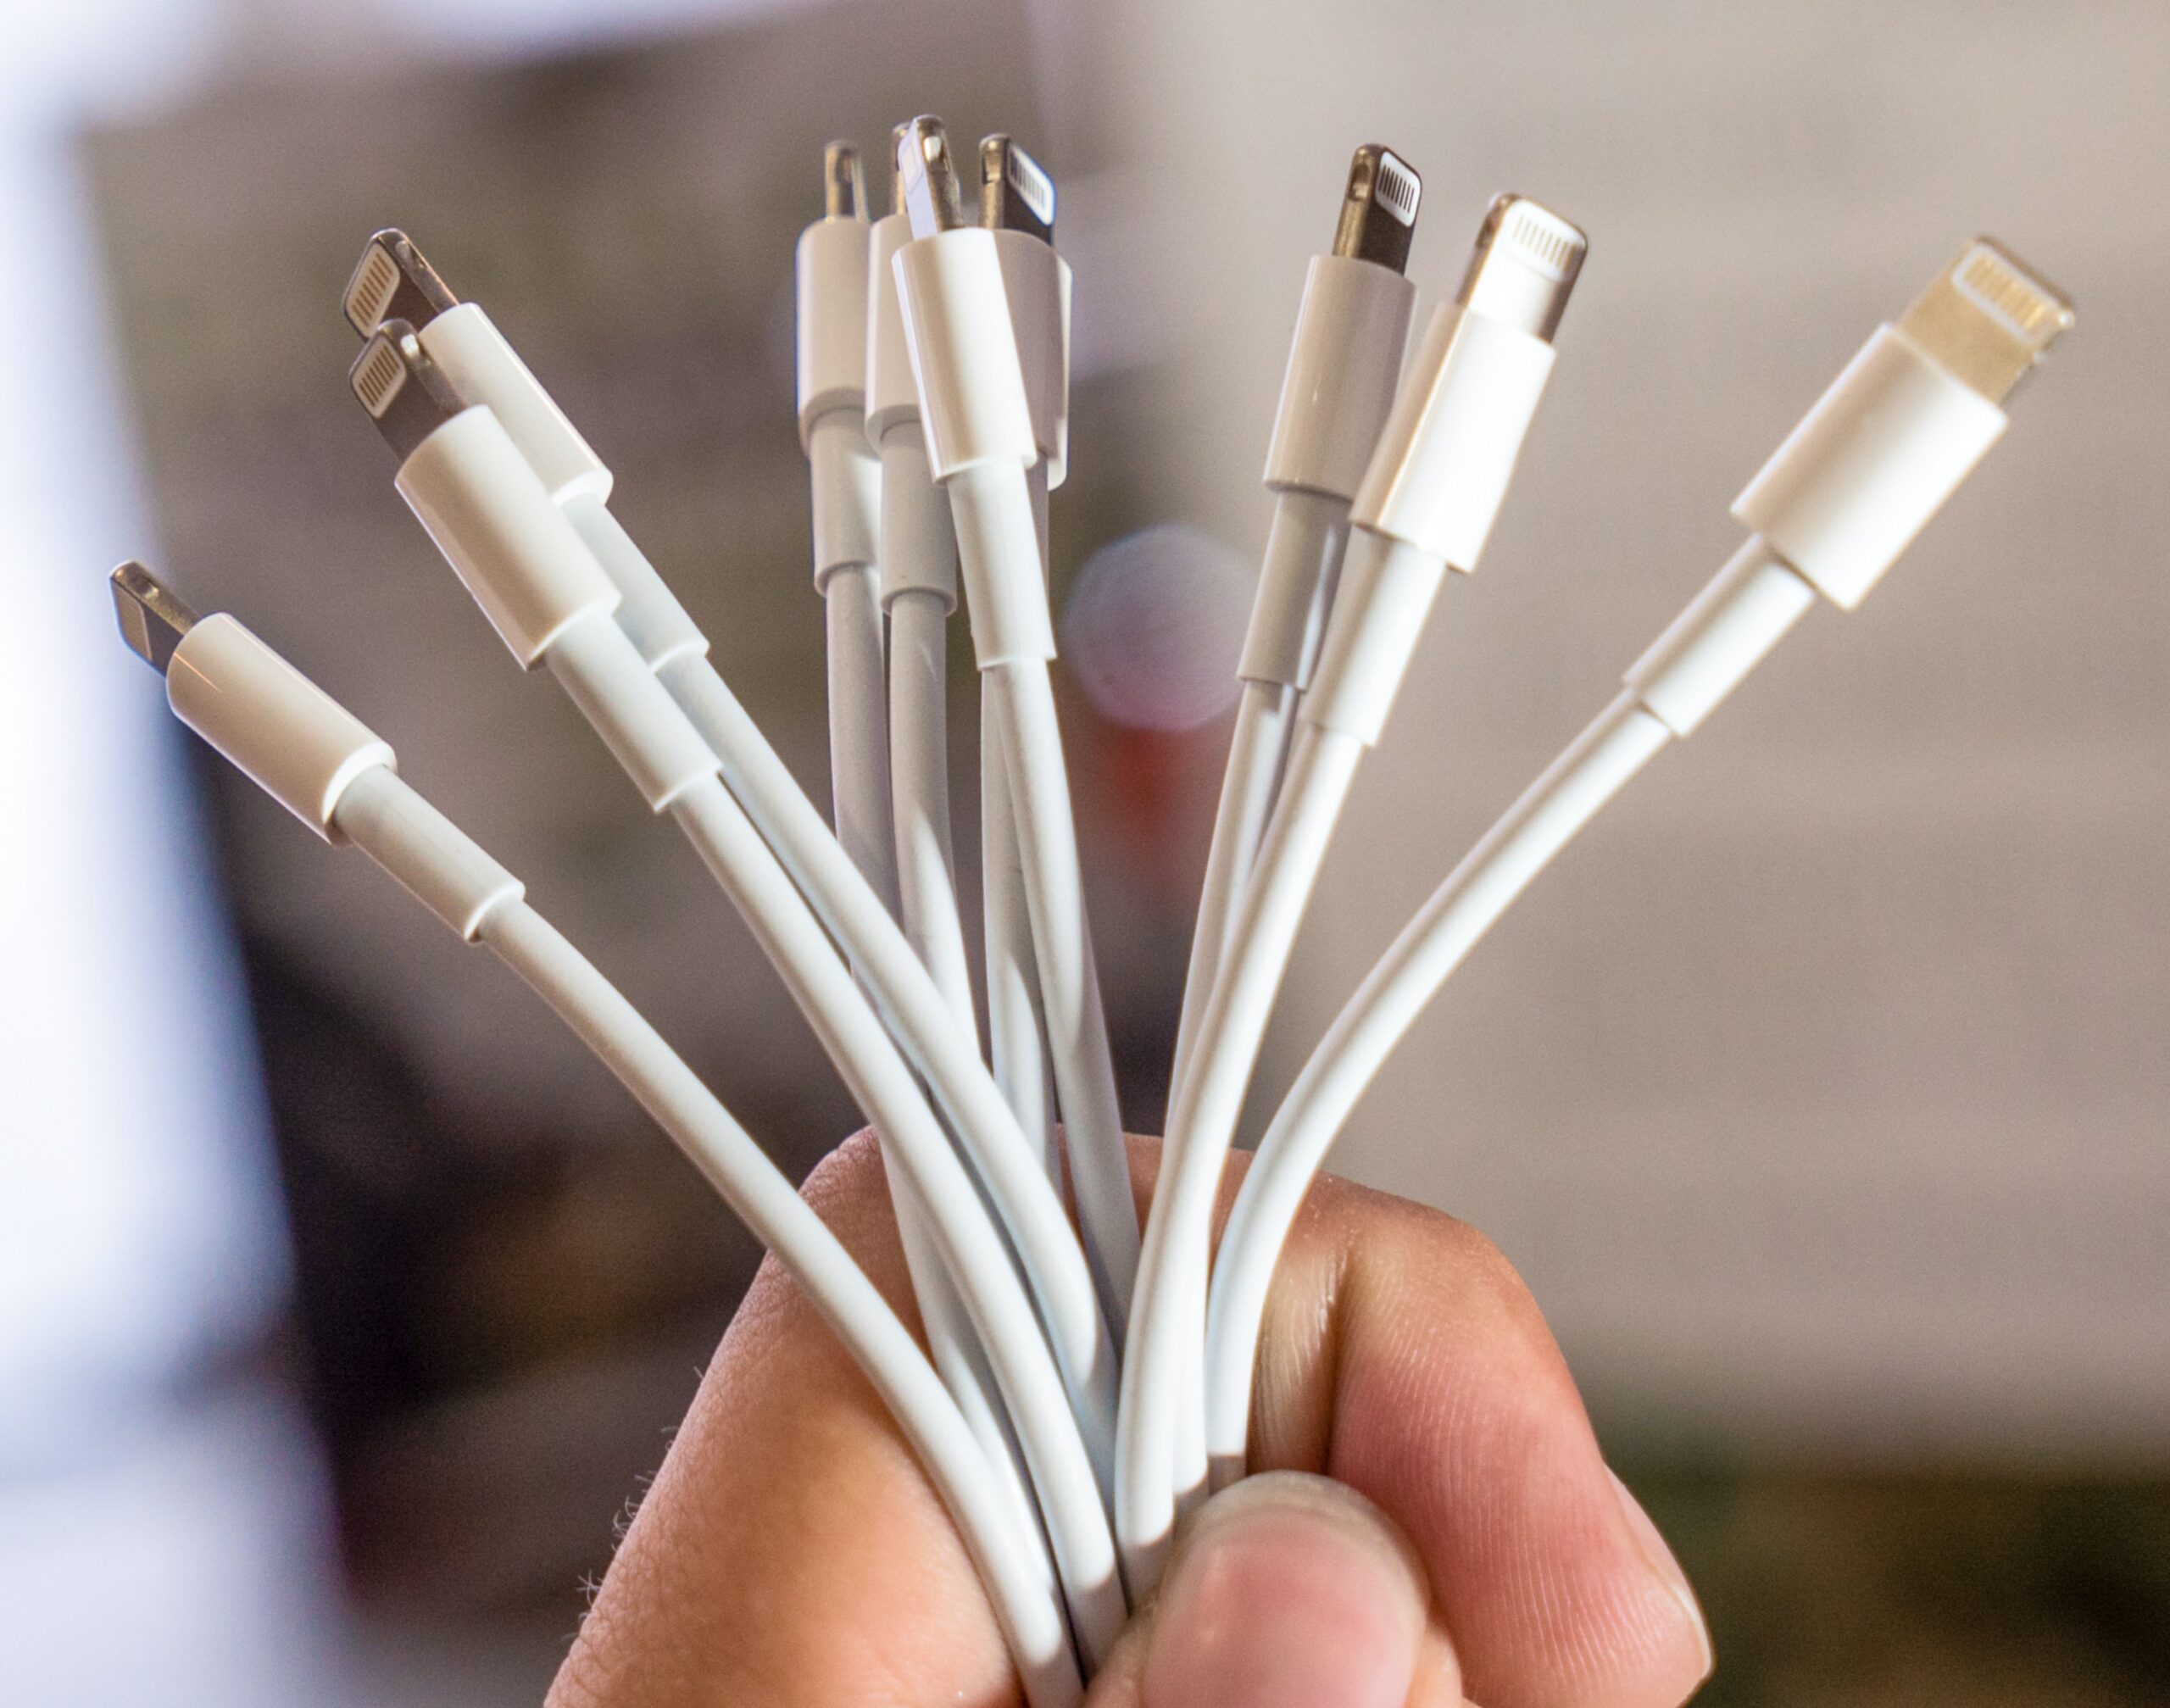 Multiple Apple Charging Cables in Hand